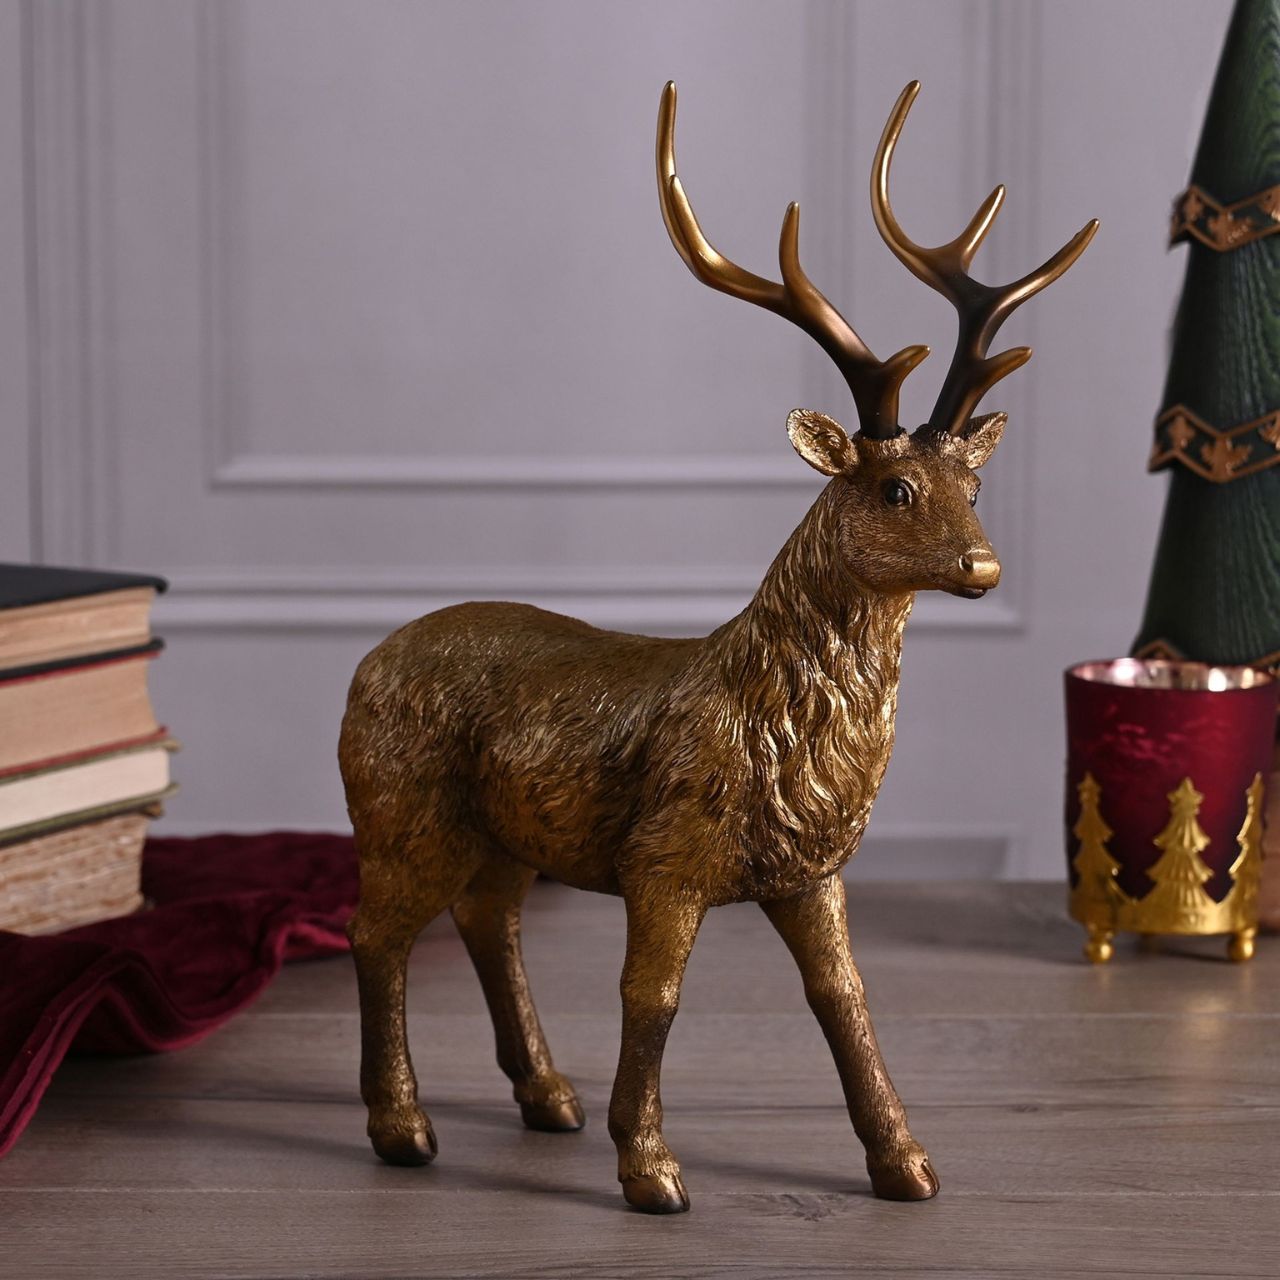 Christmas Standing Gold Stag  A standing gold stag by THE SEASONAL GIFT CO.  This eye-catching Christmas decoration commands attention when displayed at home over the festive period.